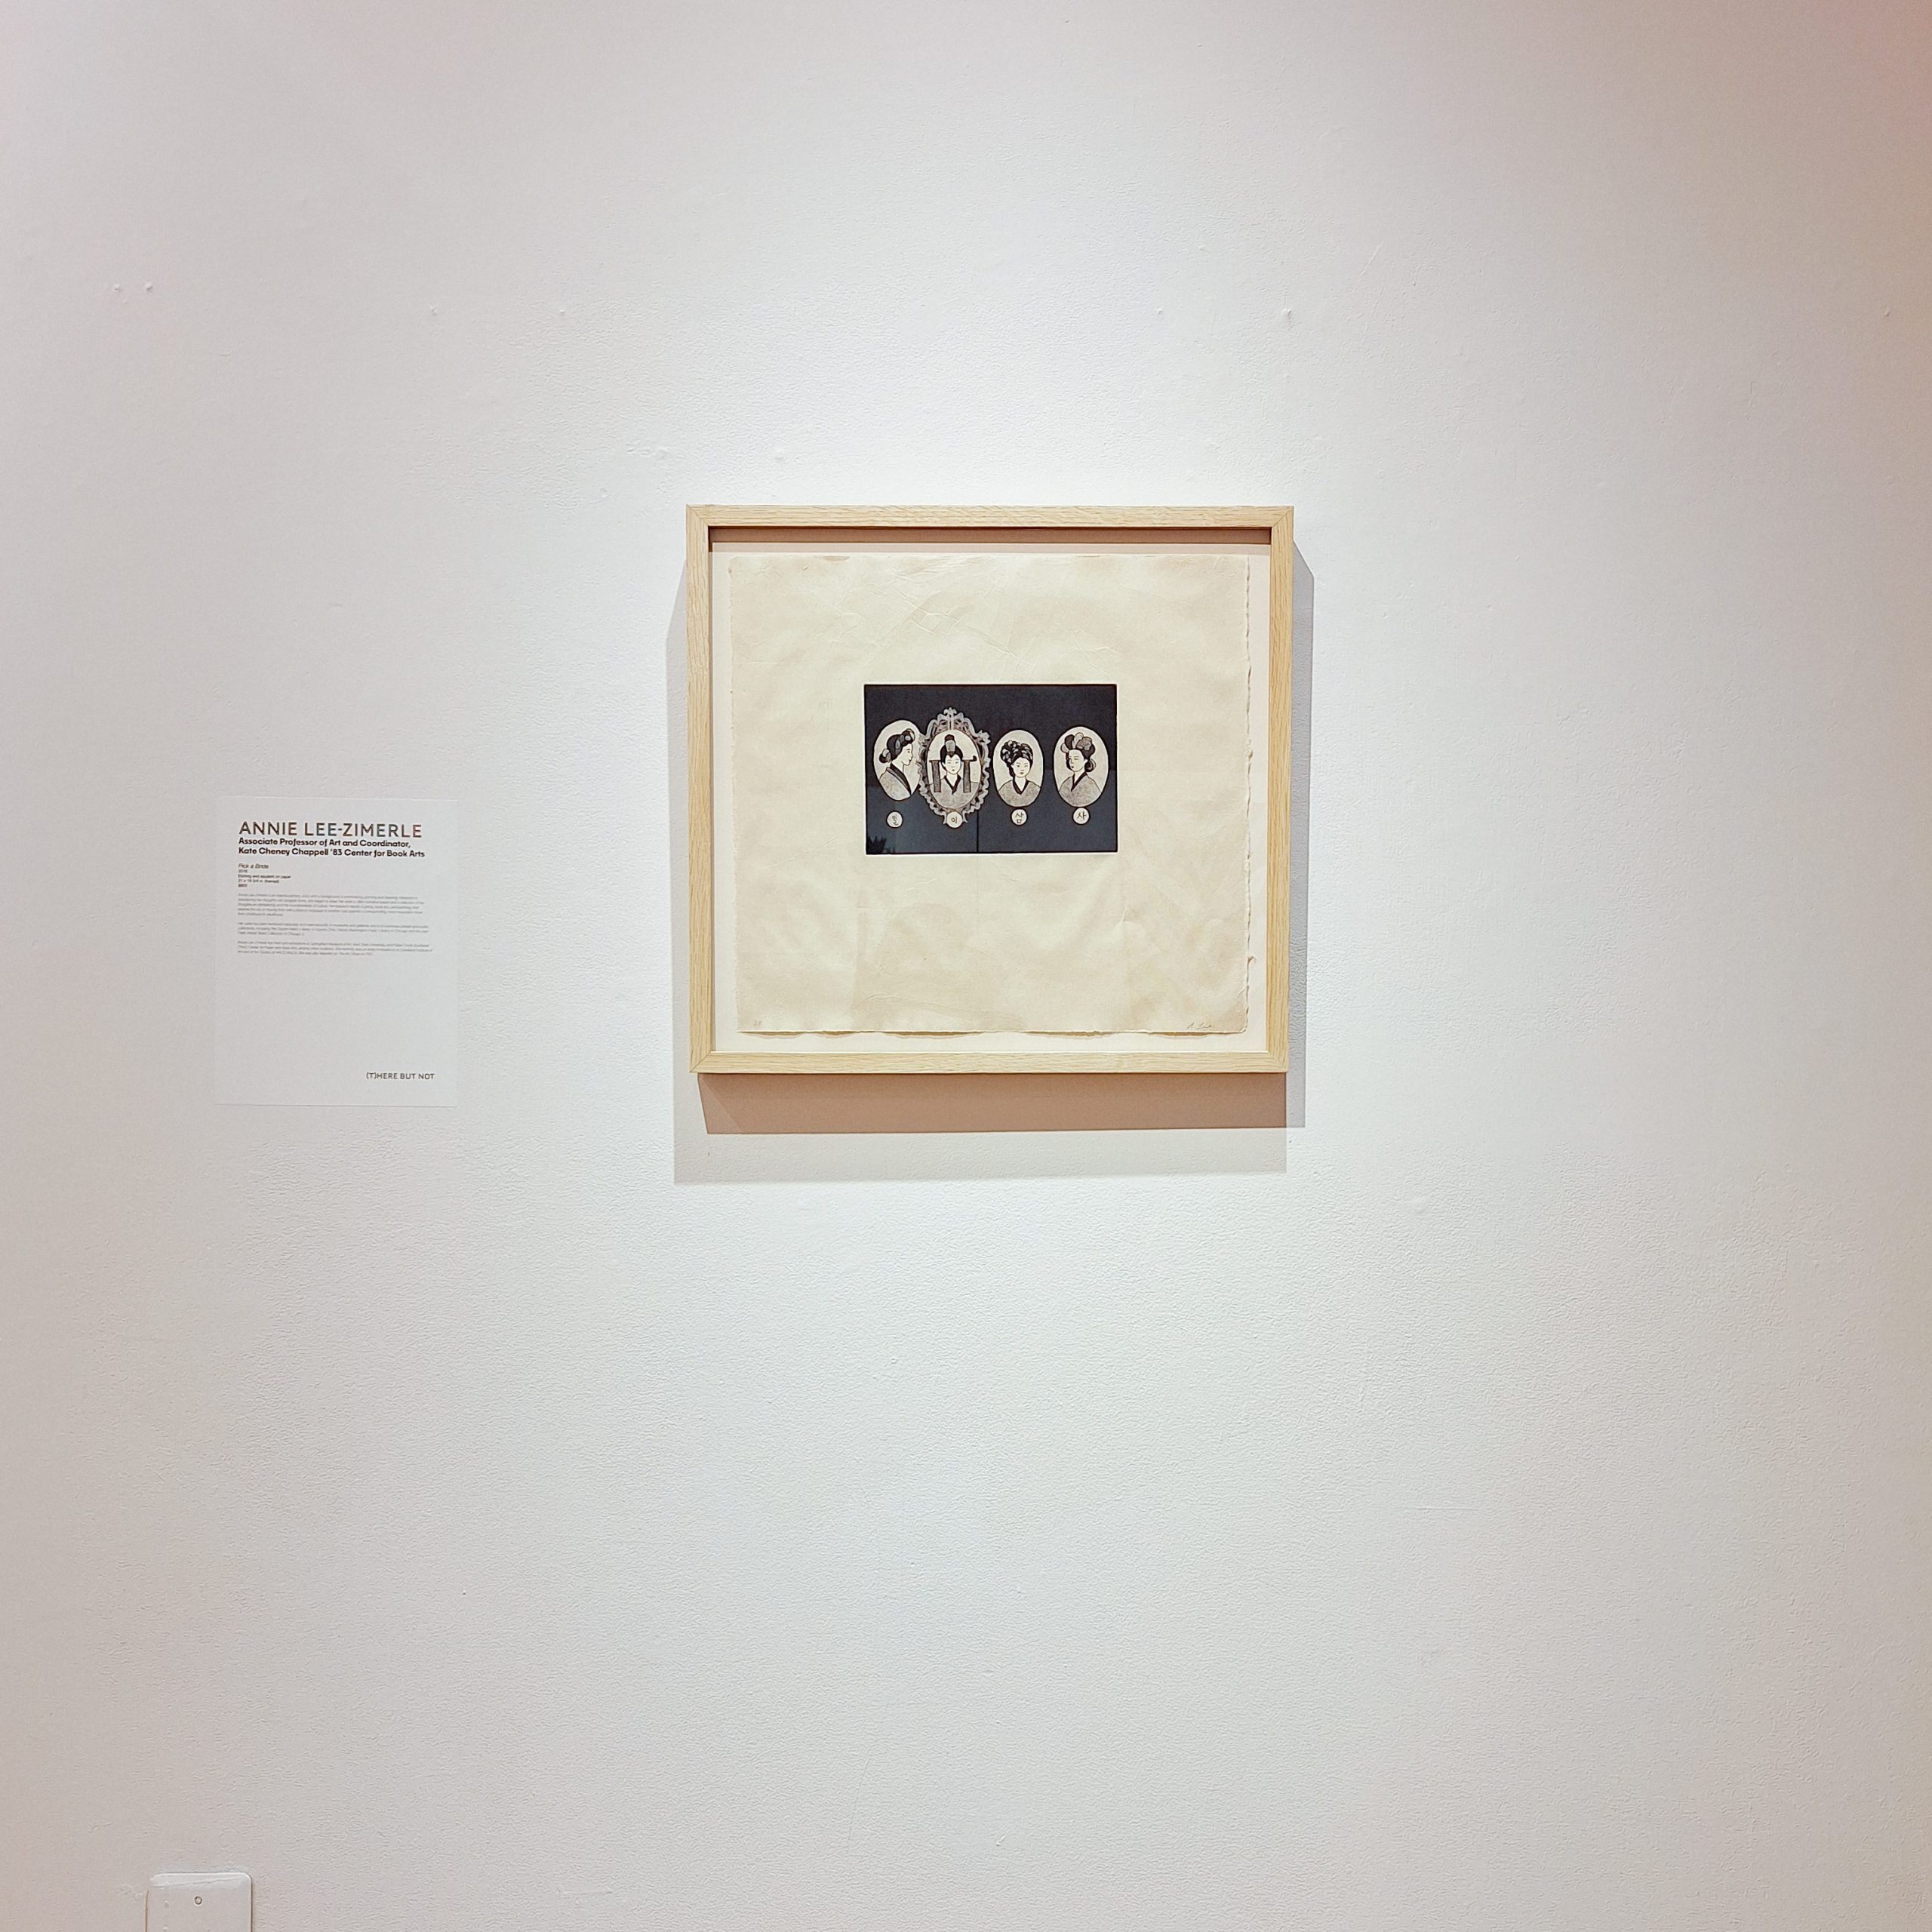 Annie Lee-Zimerle, "Pick a Bride," 2018. Etching and aquatint on paper, 21 x 19 3/4 in. (framed). Part of "(T)HERE BUT NOT: The 2024 University of Southern Maine Art Department Exhibition," Installation view, 2024. University of Southern Maine Art Gallery.